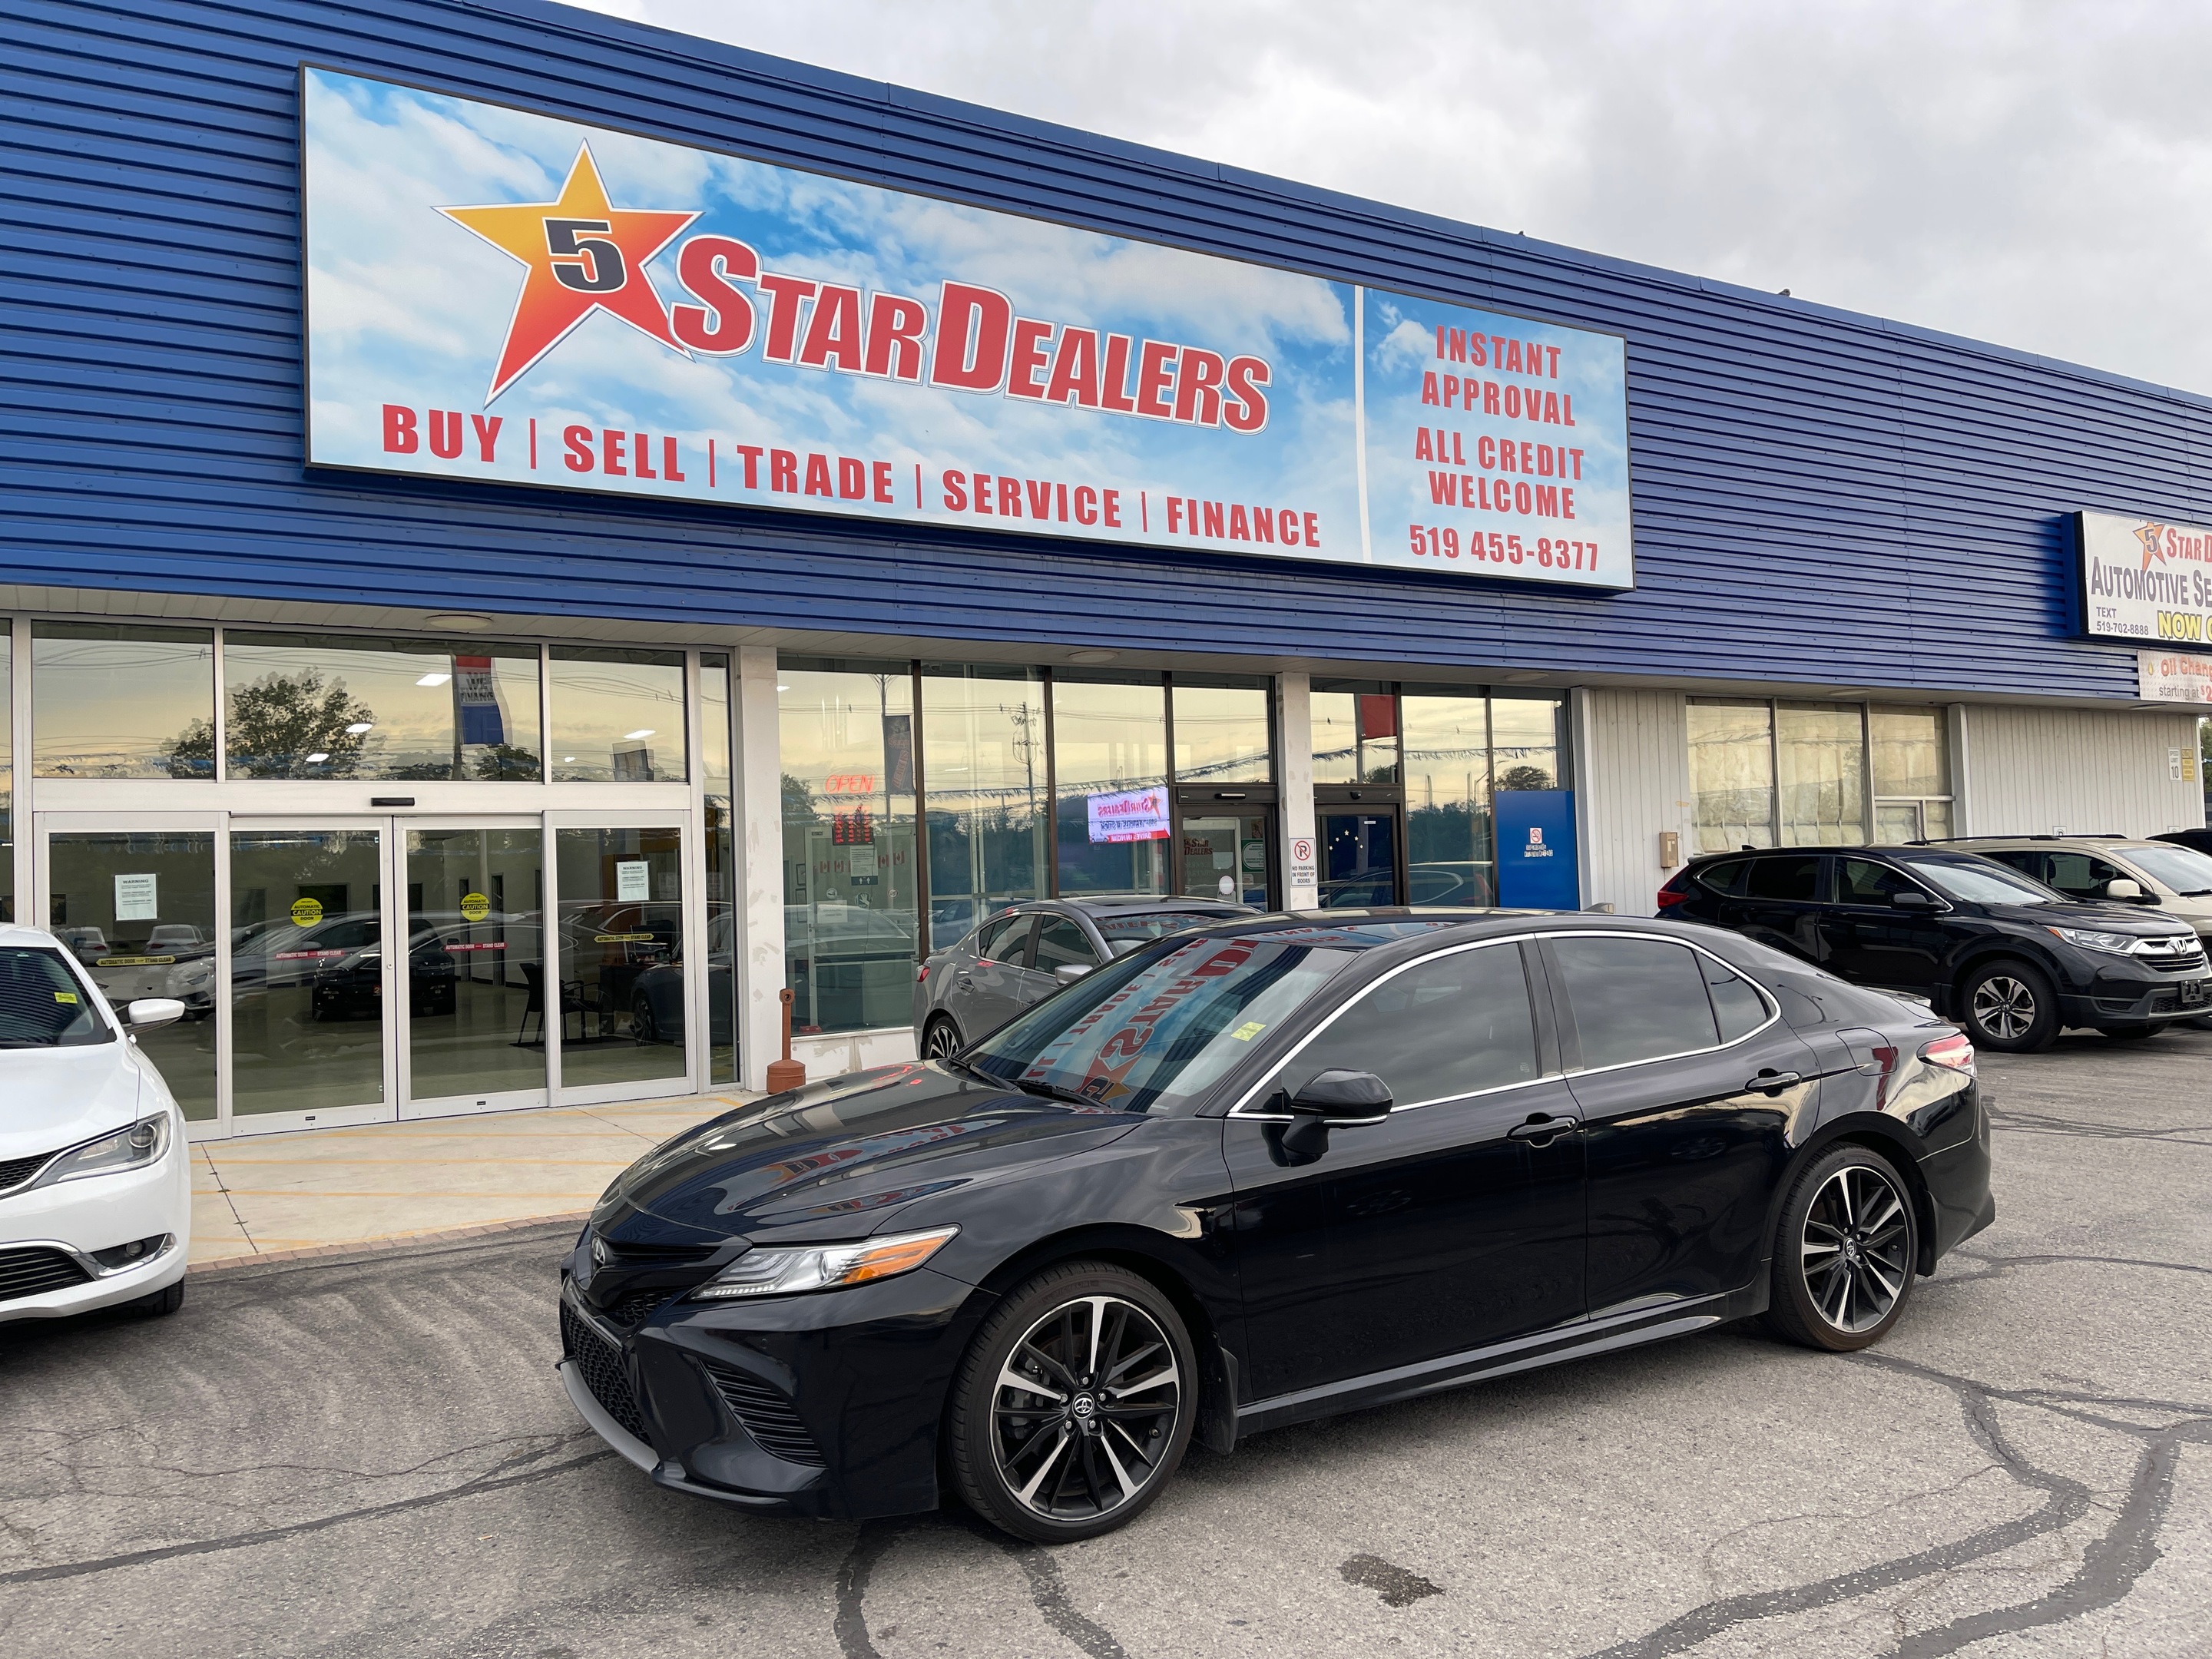 2018 Toyota Camry NAV LEATHER SUNROOF MINT! WE FINANCE ALL CREDIT!